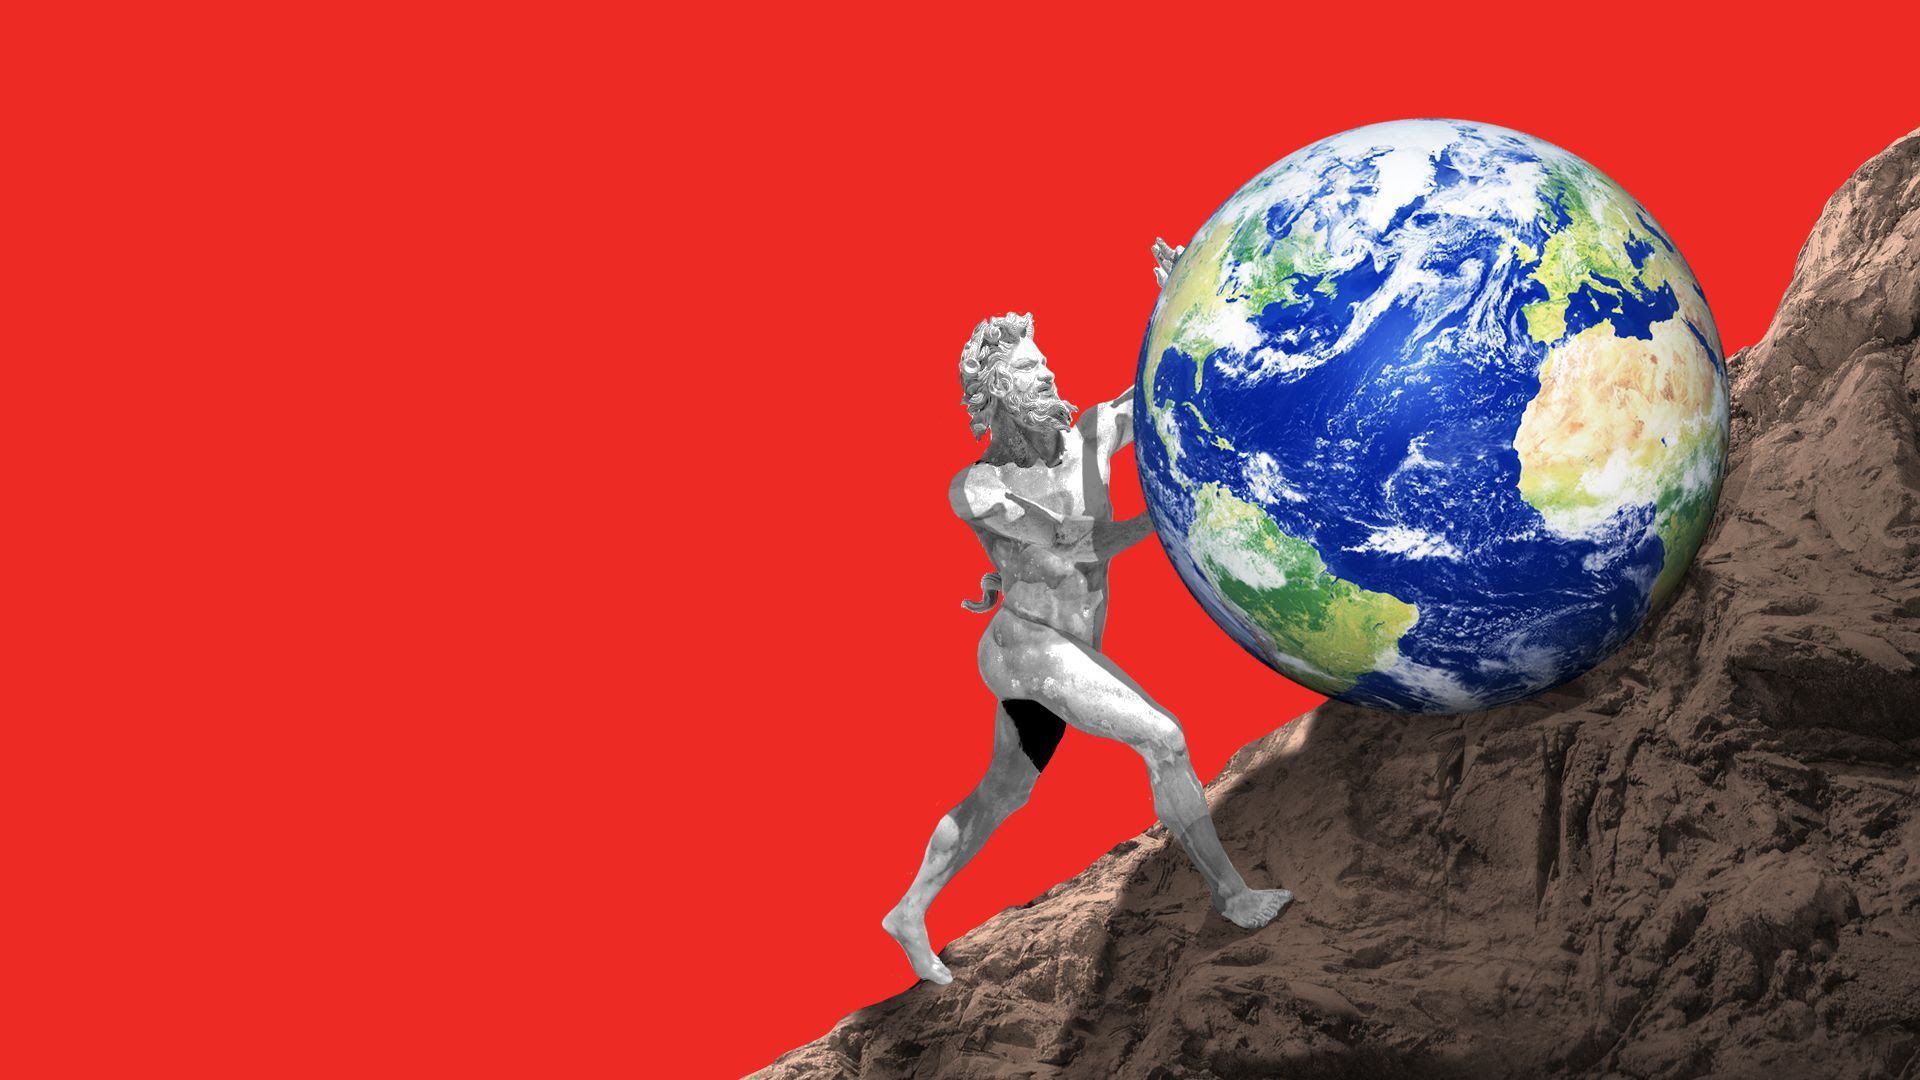 Illustration of a person pushing the globe up a mountain.